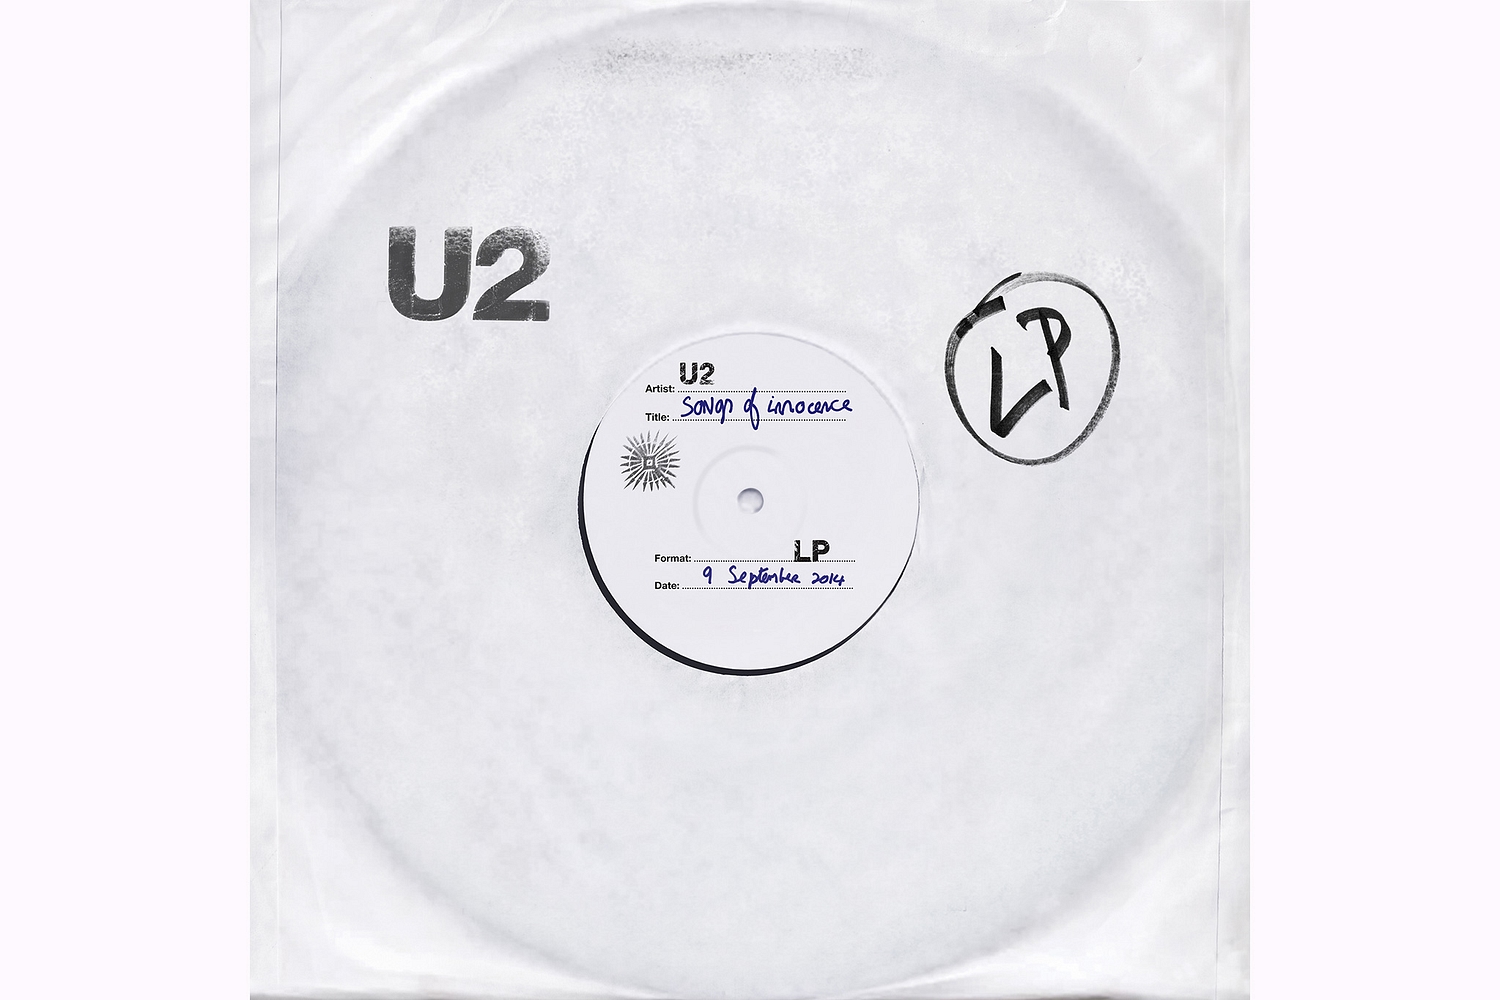 U2 release new album 'Songs of Innocence', Apple give it away free today